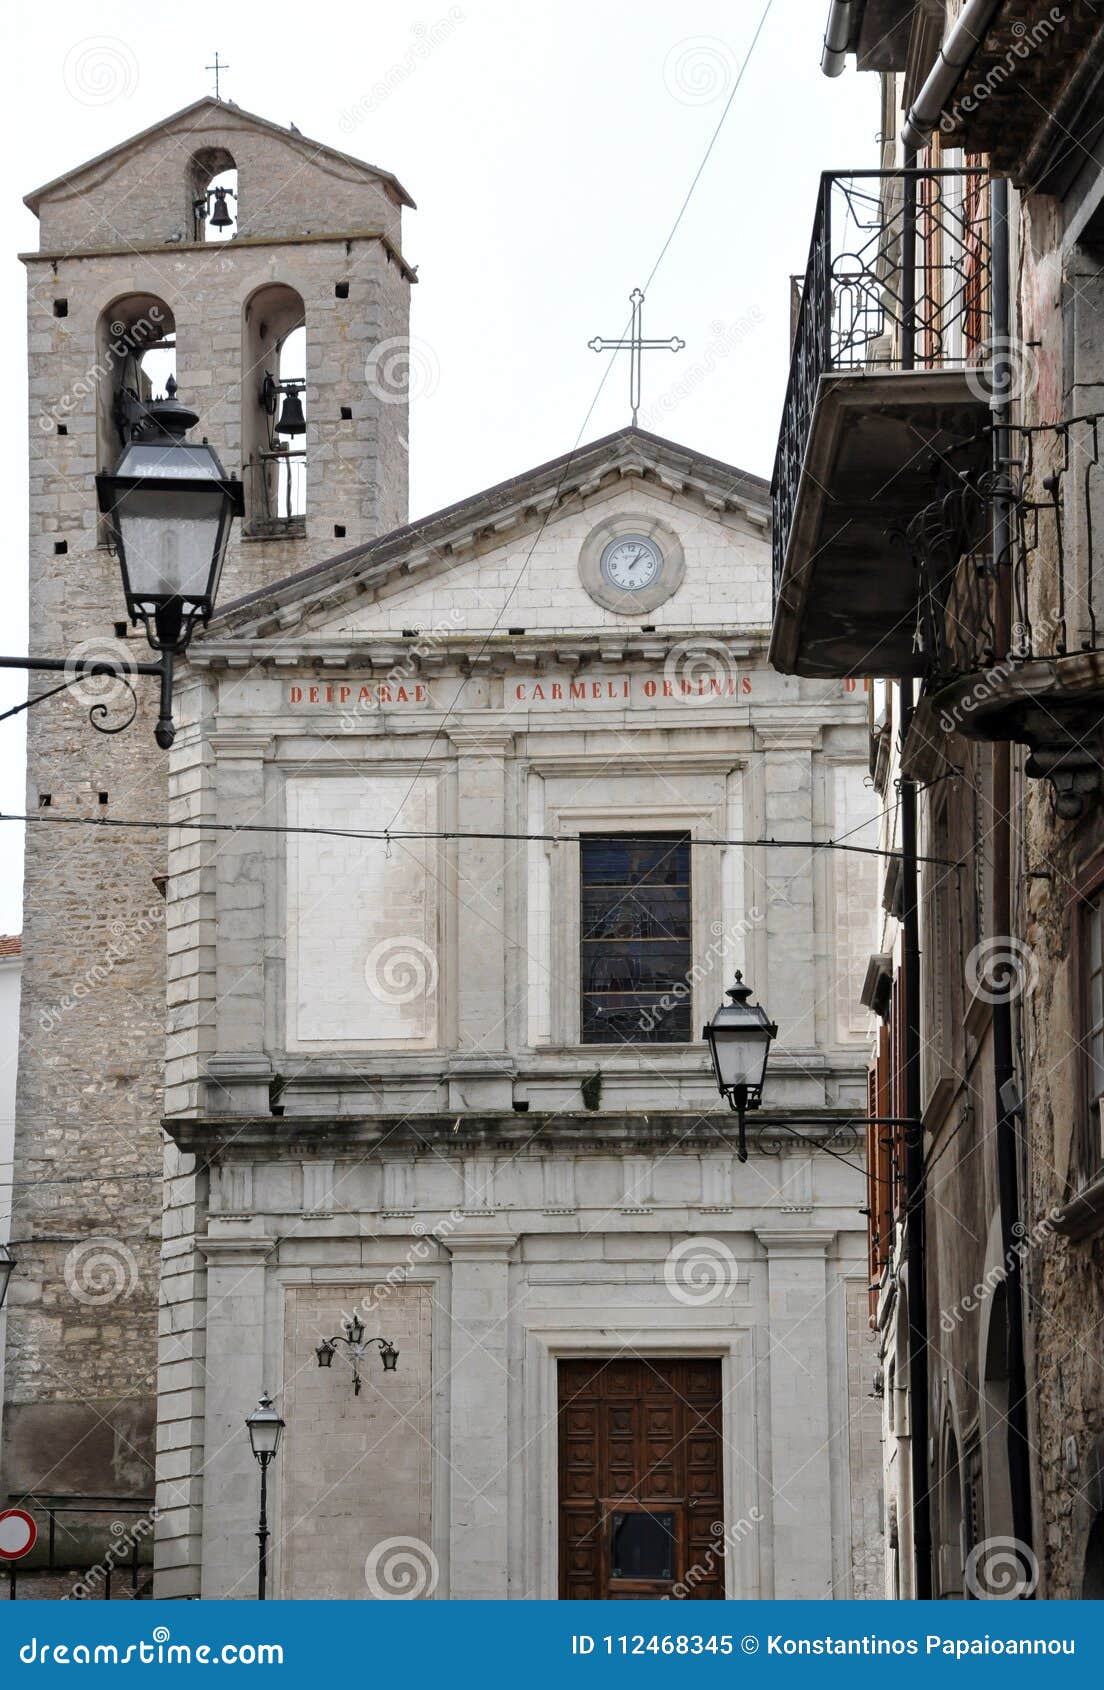 Church in the Medieval Village of Agnone Editorial Image - Image of ...